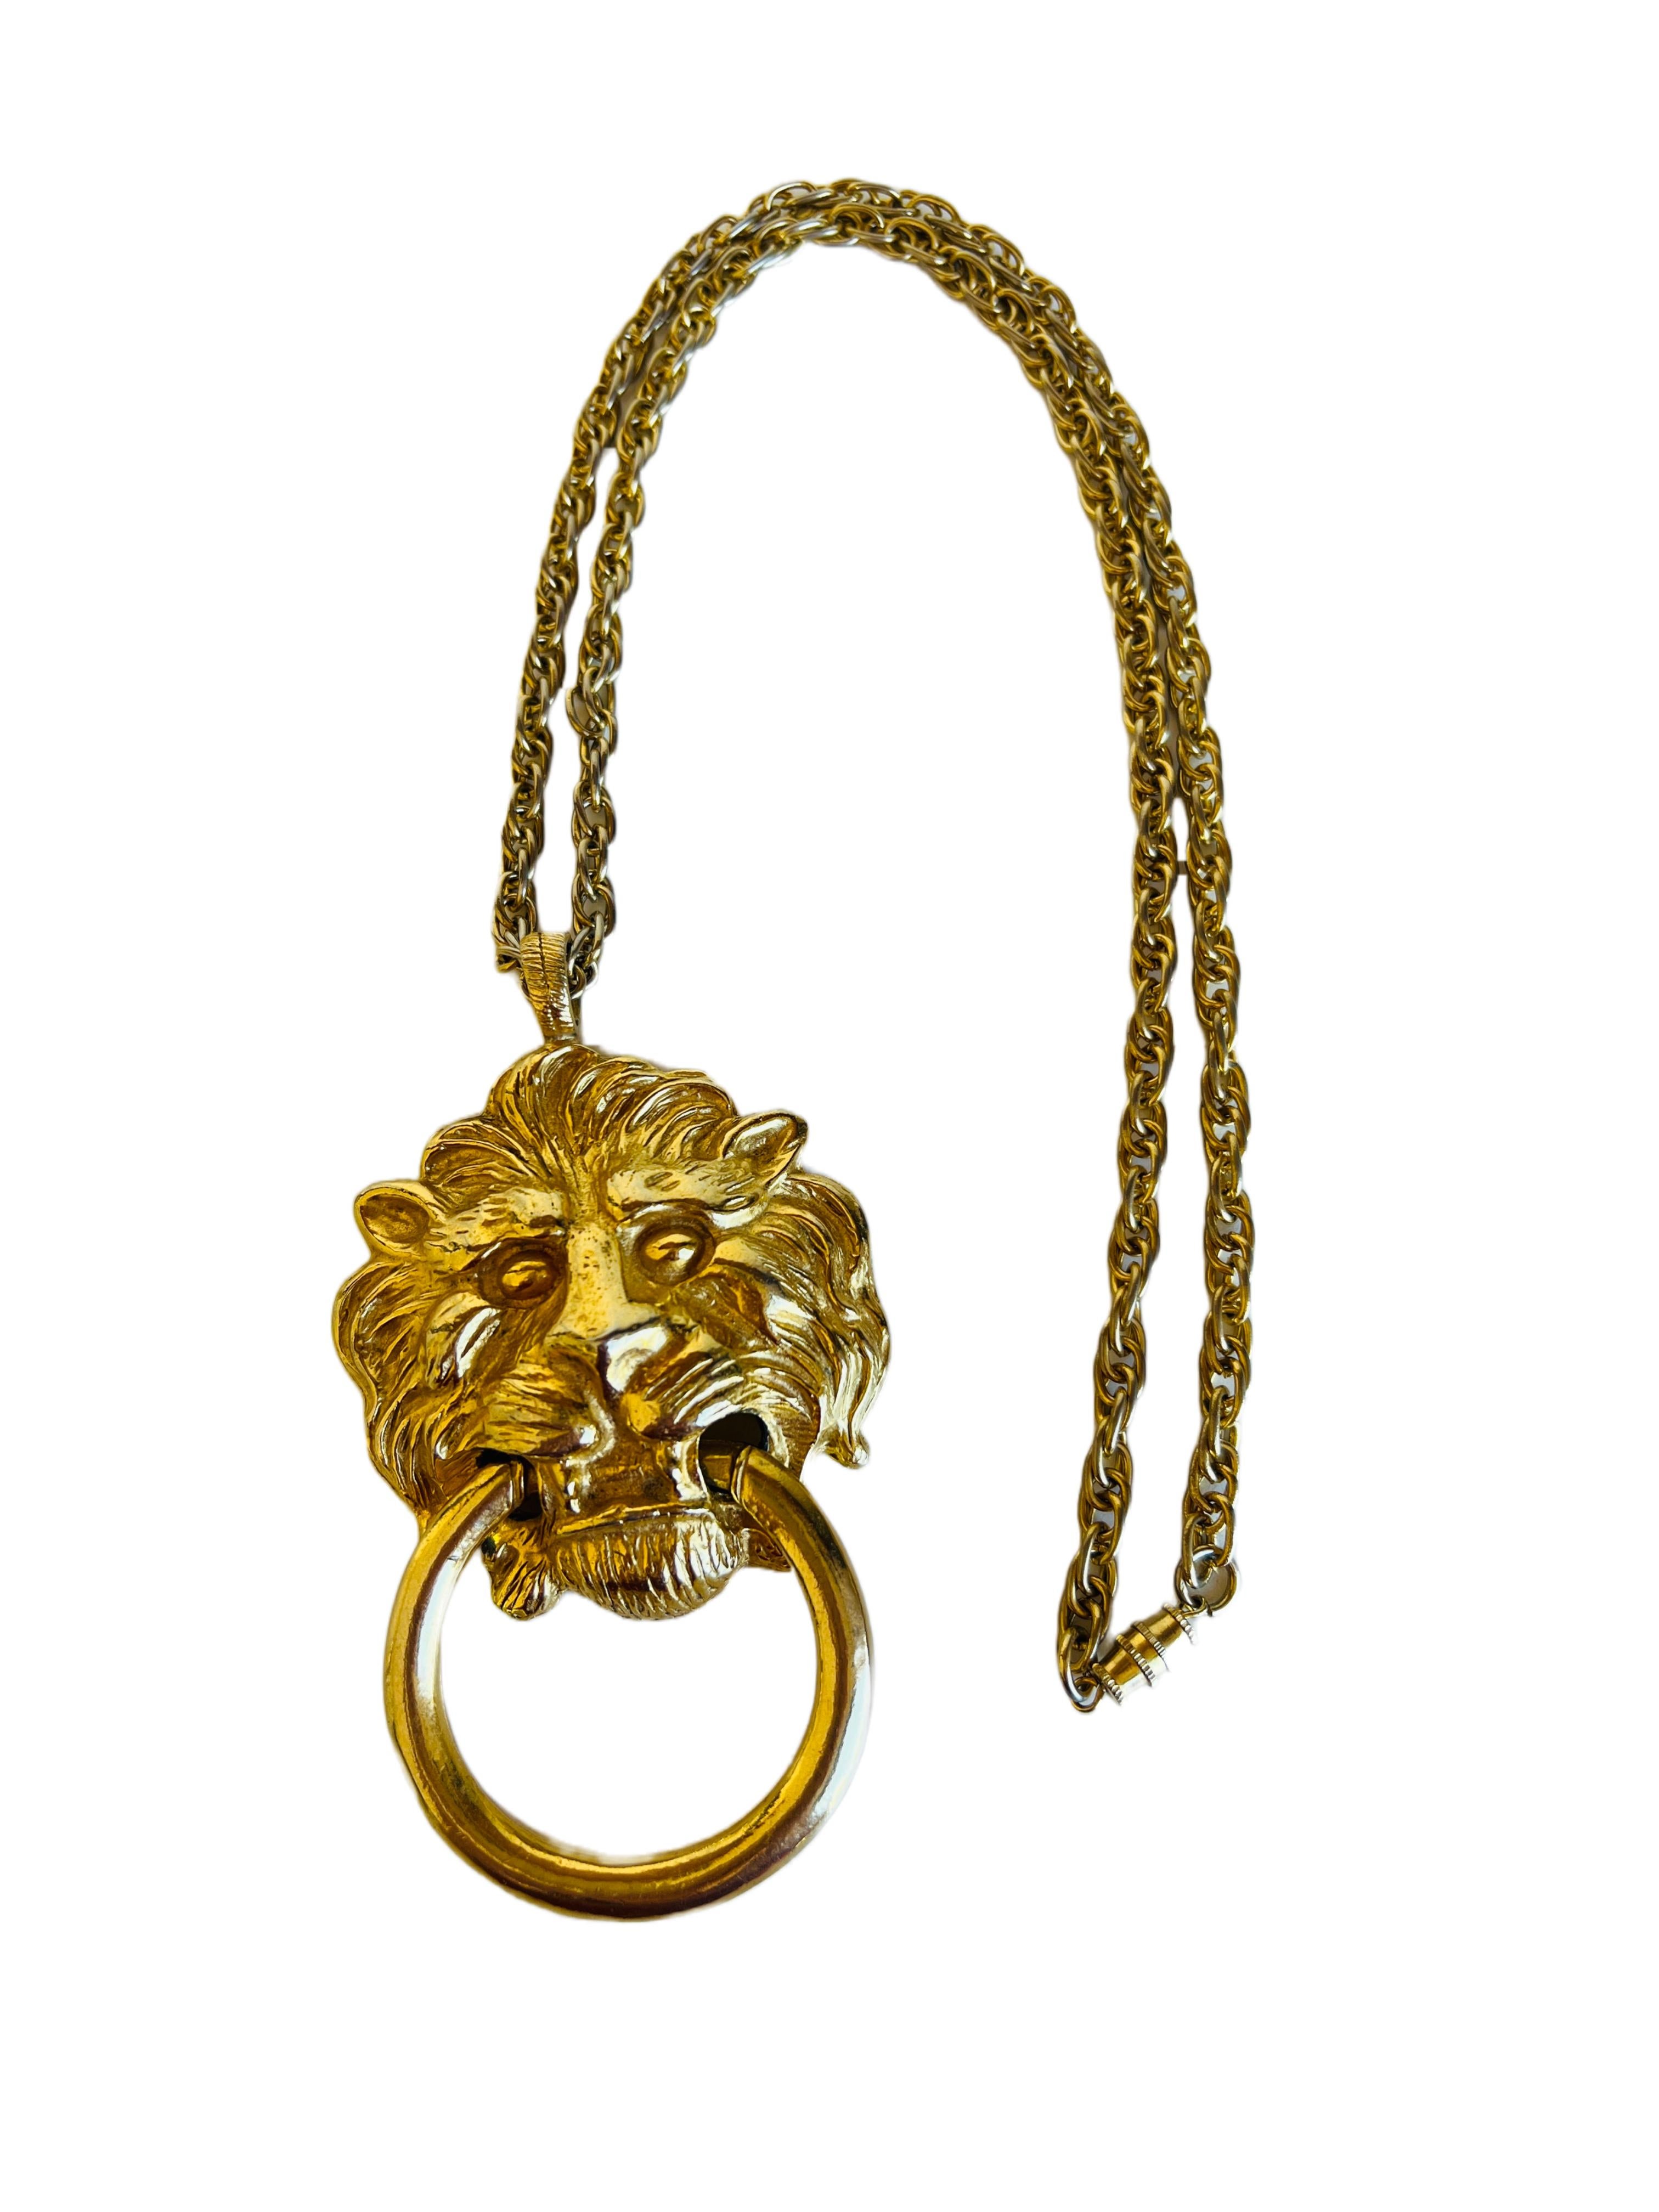 Bold statement necklace featuring a large lion head door knocker pendant by Kenneth Jay Lane. 

Size: The chain is 24-3/4